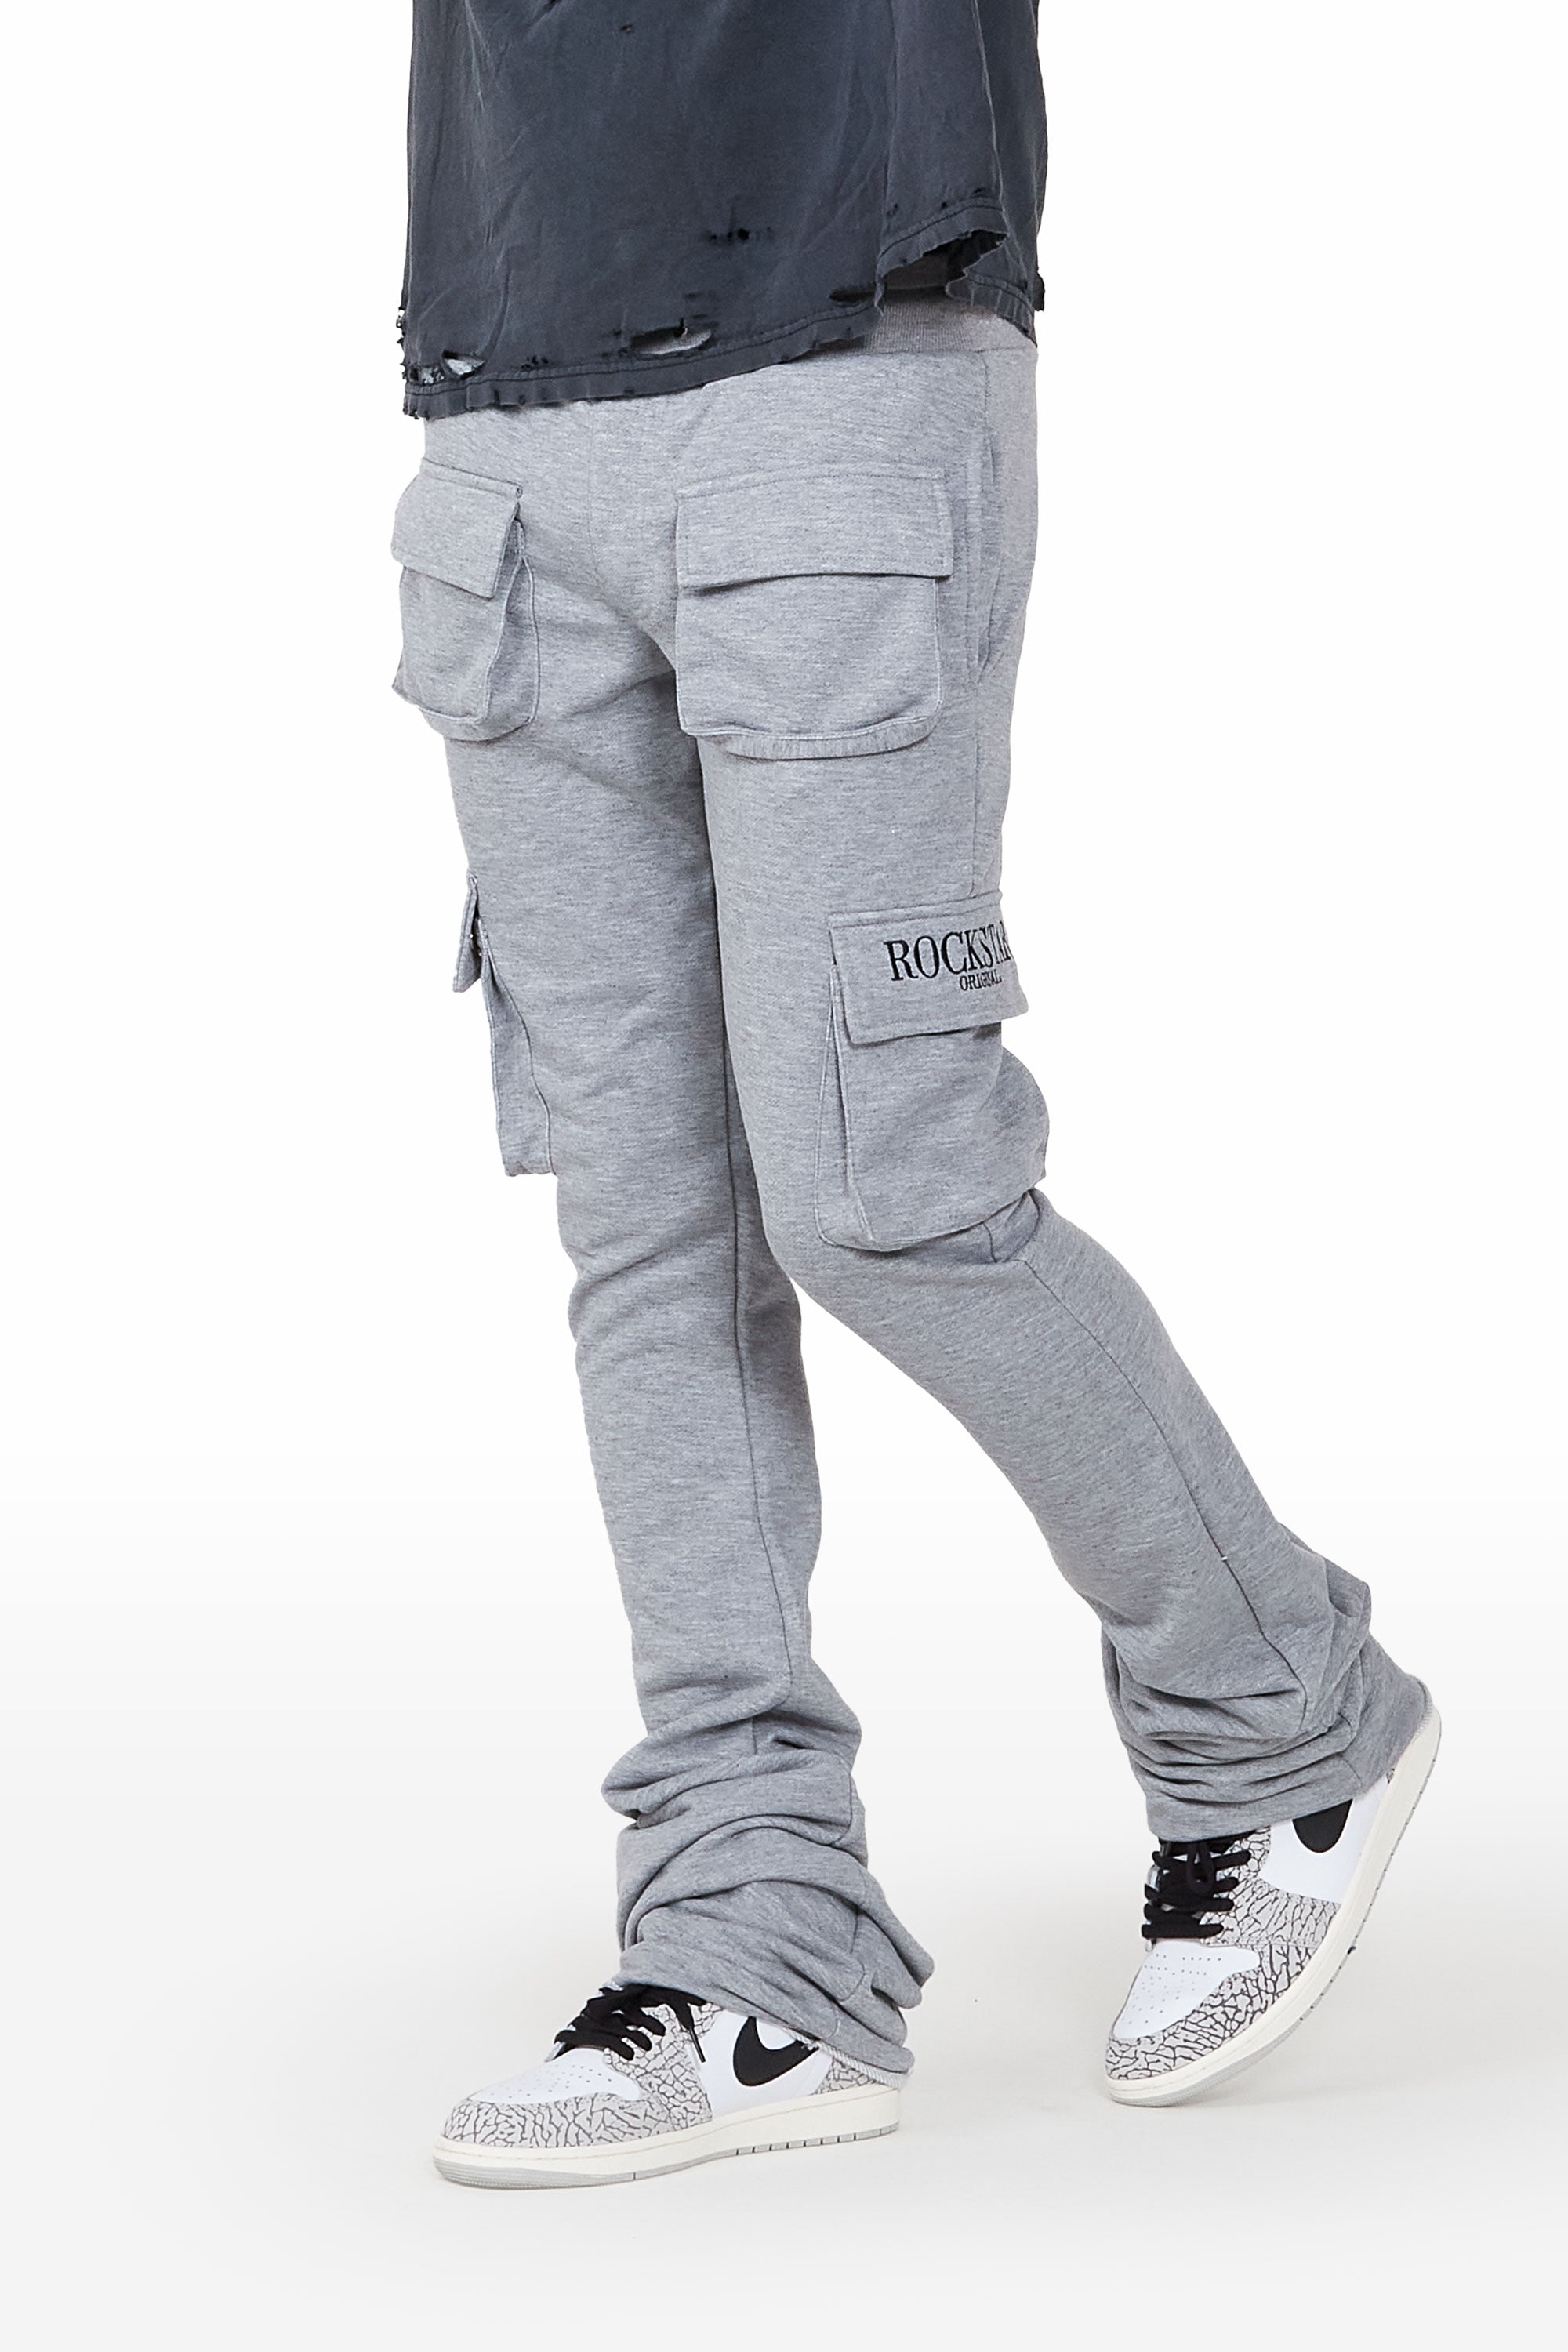 Eloise Heather Grey Stacked Flare Pants